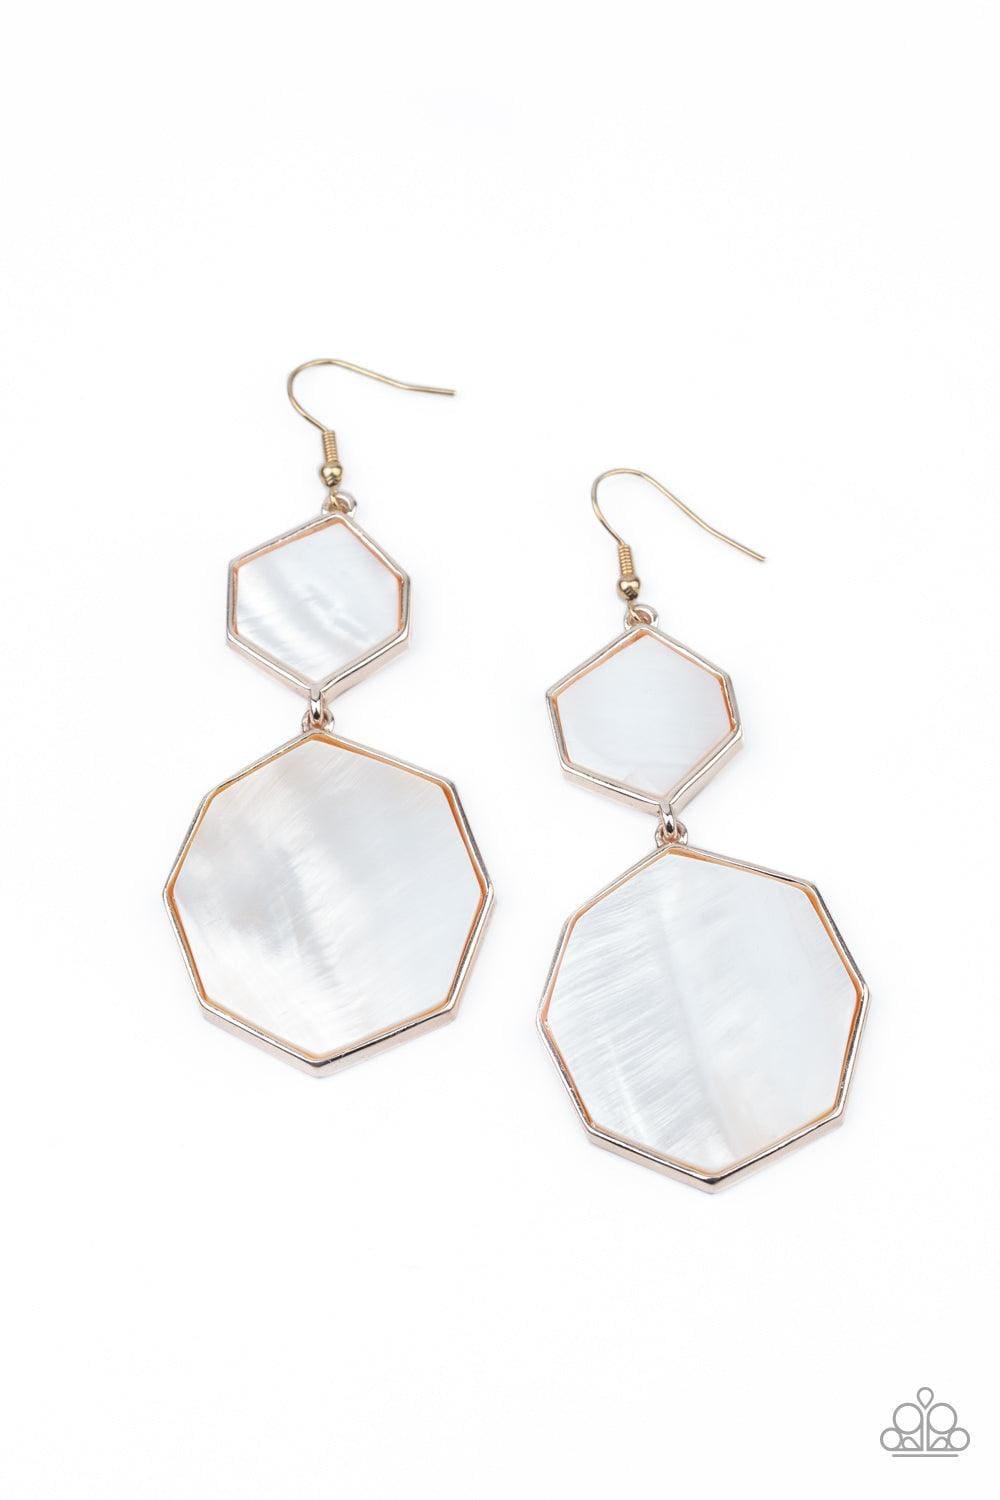 Paparazzi Accessories - Vacation Glow - Rose Gold Earrings - Bling by JessieK